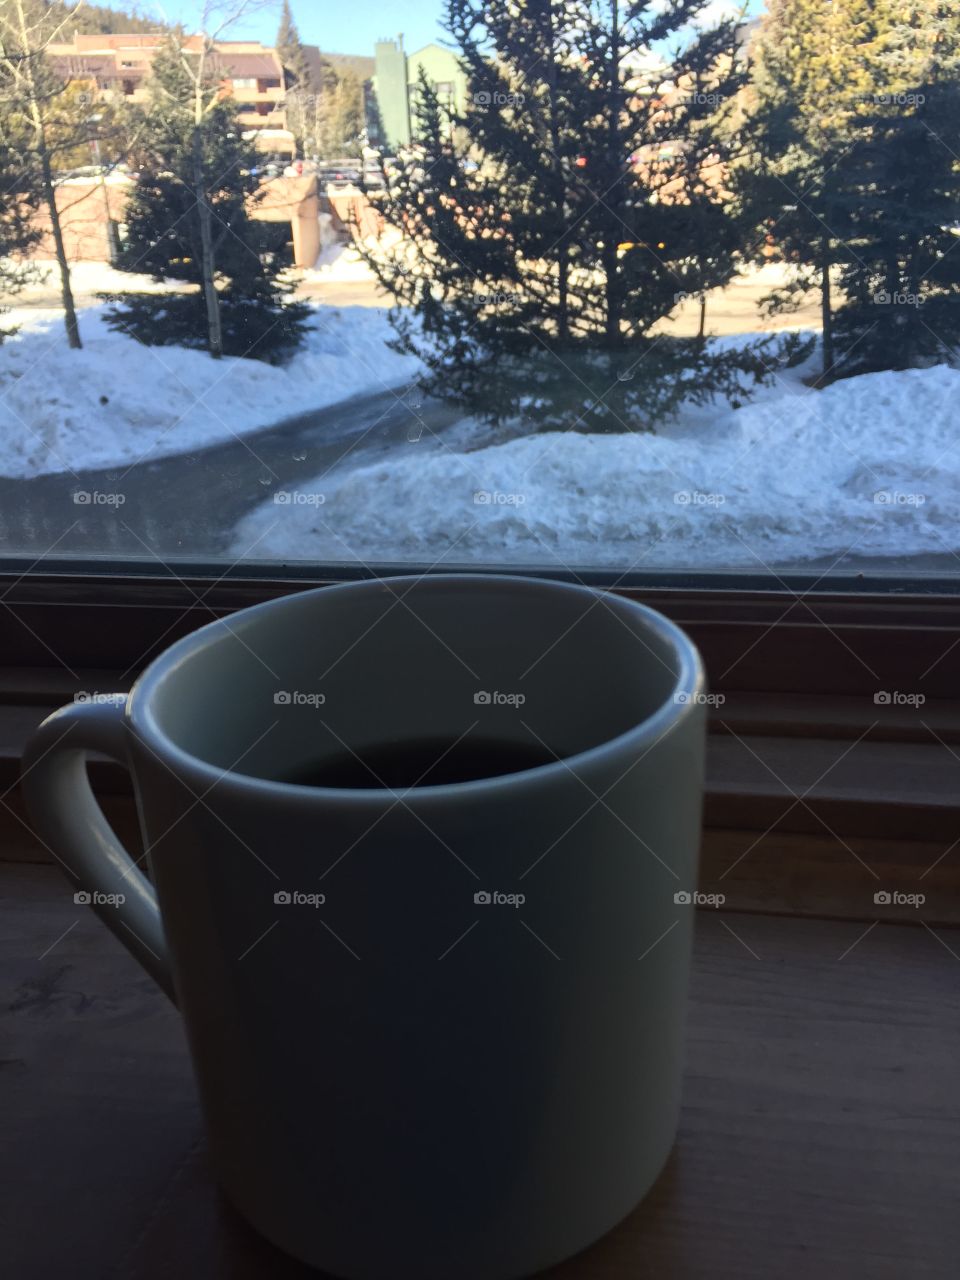 Cup of tea inside during a snowy day